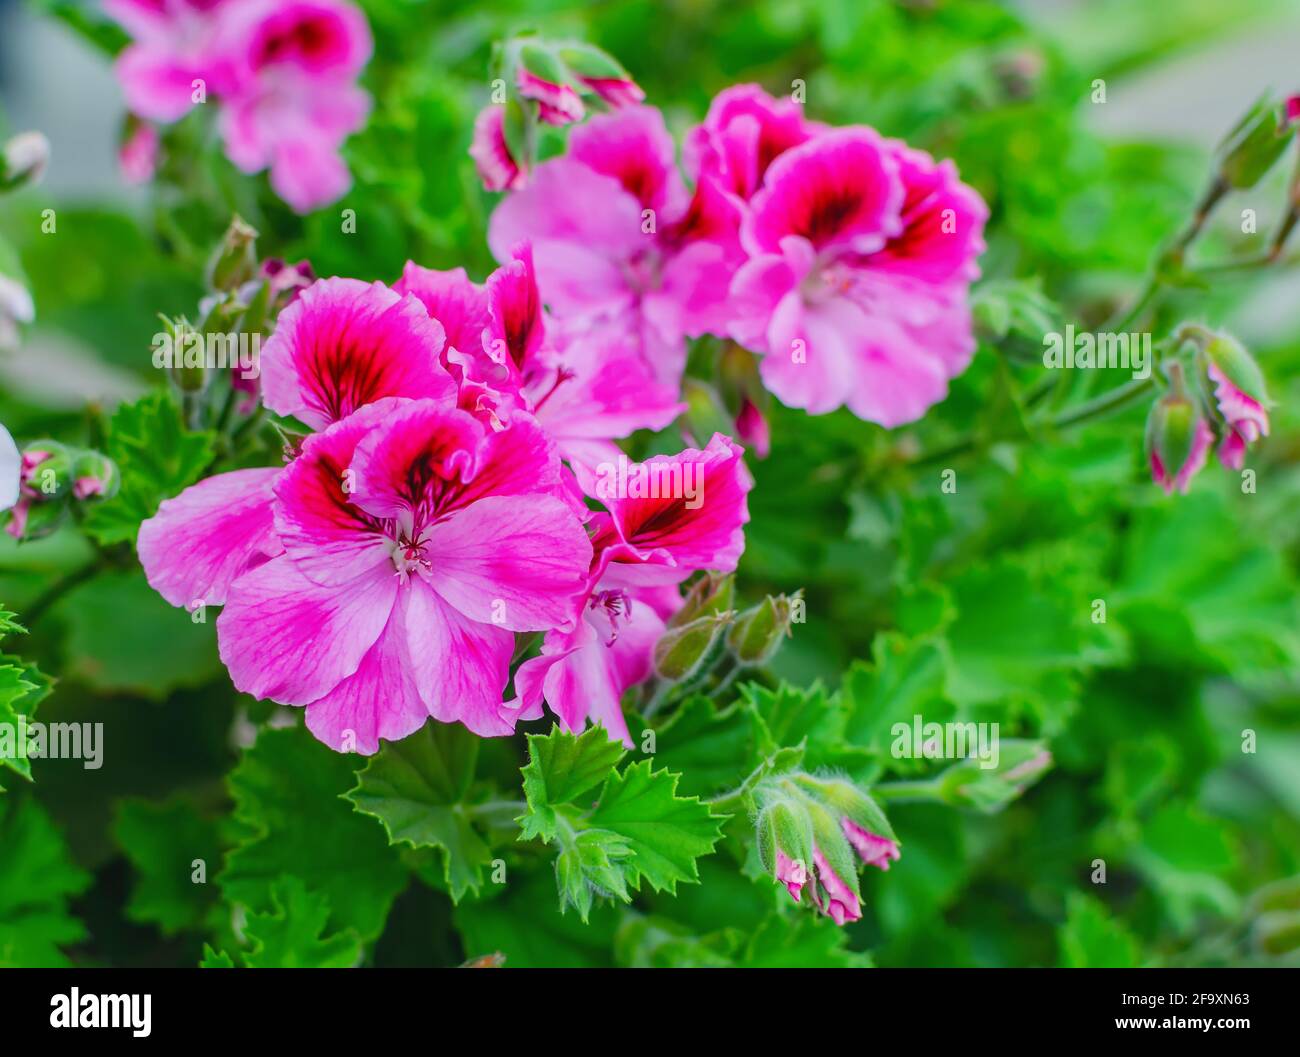 Geranium flower and close-up, beautiful group of pink flowers on the background of green leaves Stock Photo